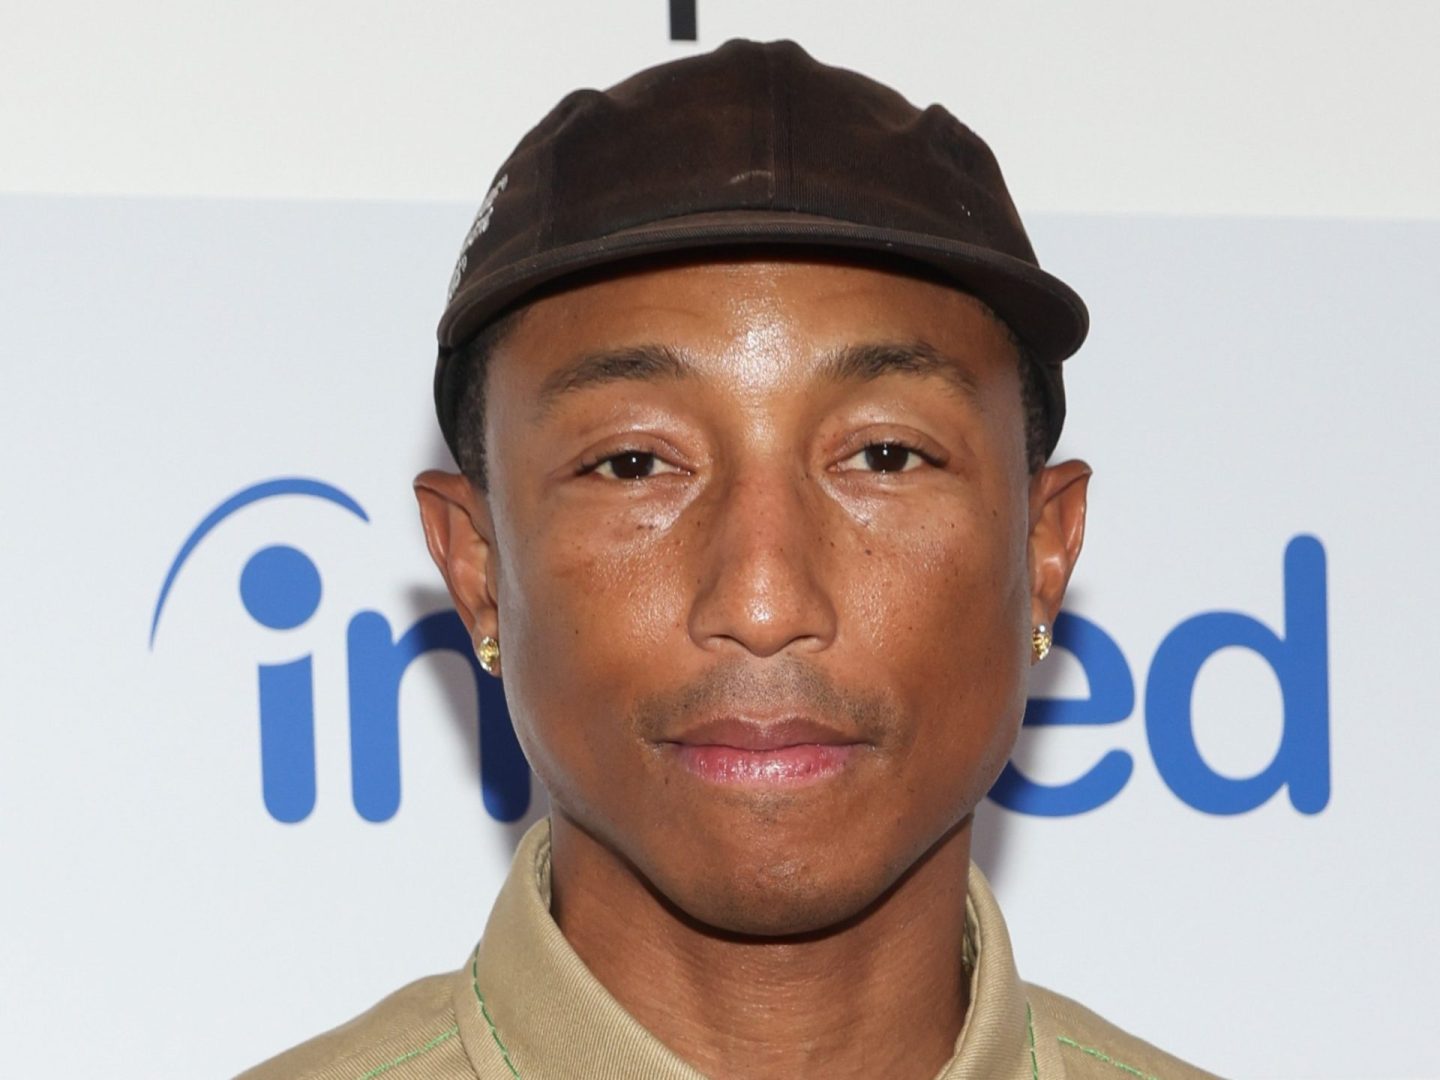 American musician Pharrell Williams of the hip hop and funk band N.E.R.D  leaves his London hotel. Pharrell, 37, is in town to perform with N.E.R.D  during their European tour. Also noted as